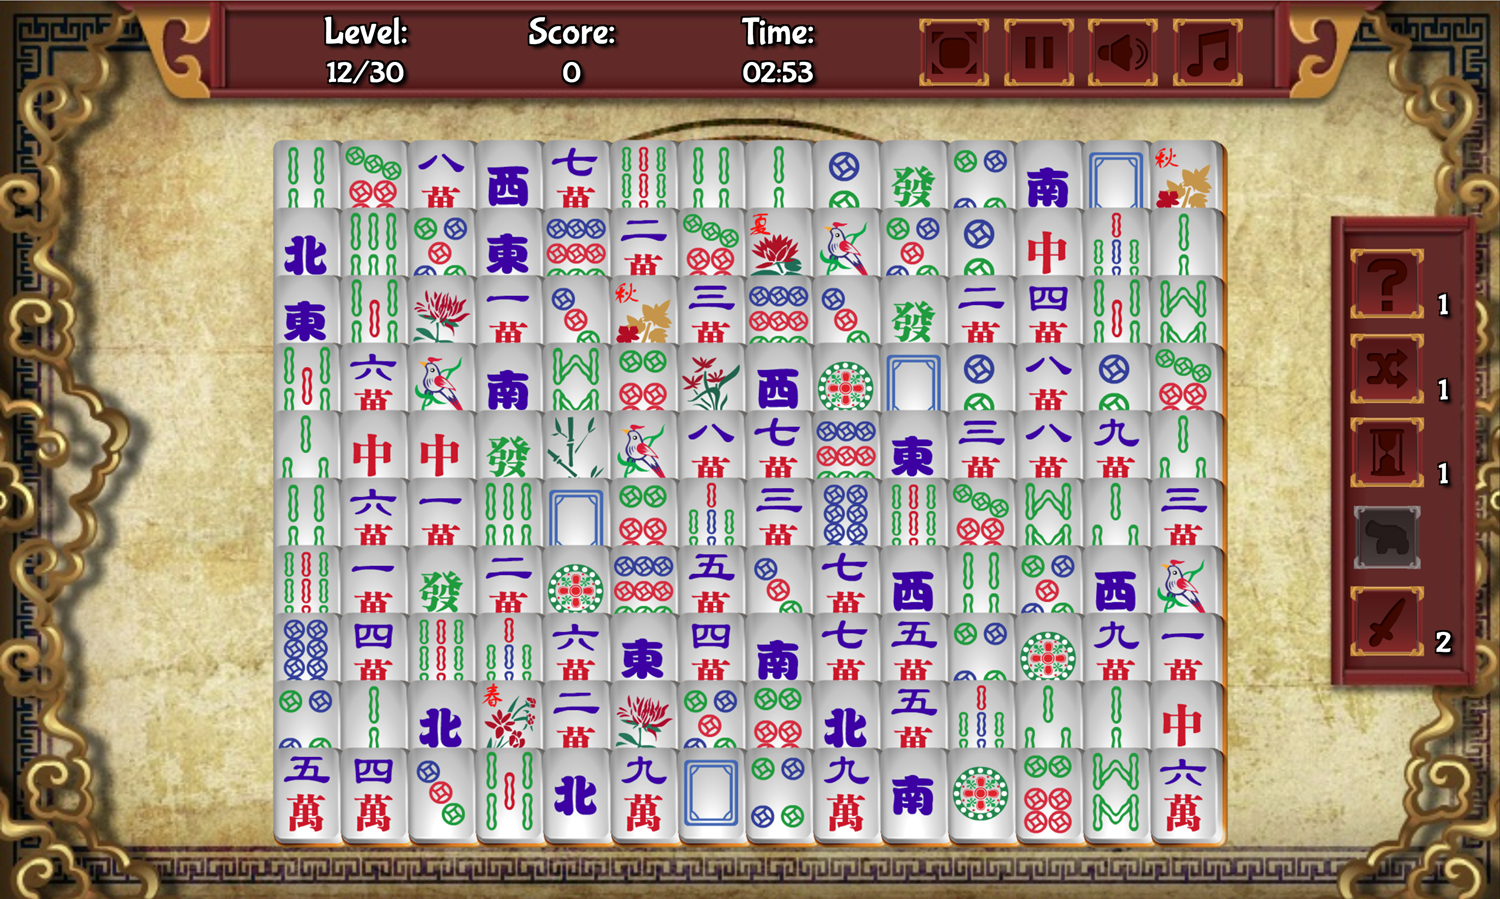 Mahjong Connect 2 Game Level With Full Board Screenshot.